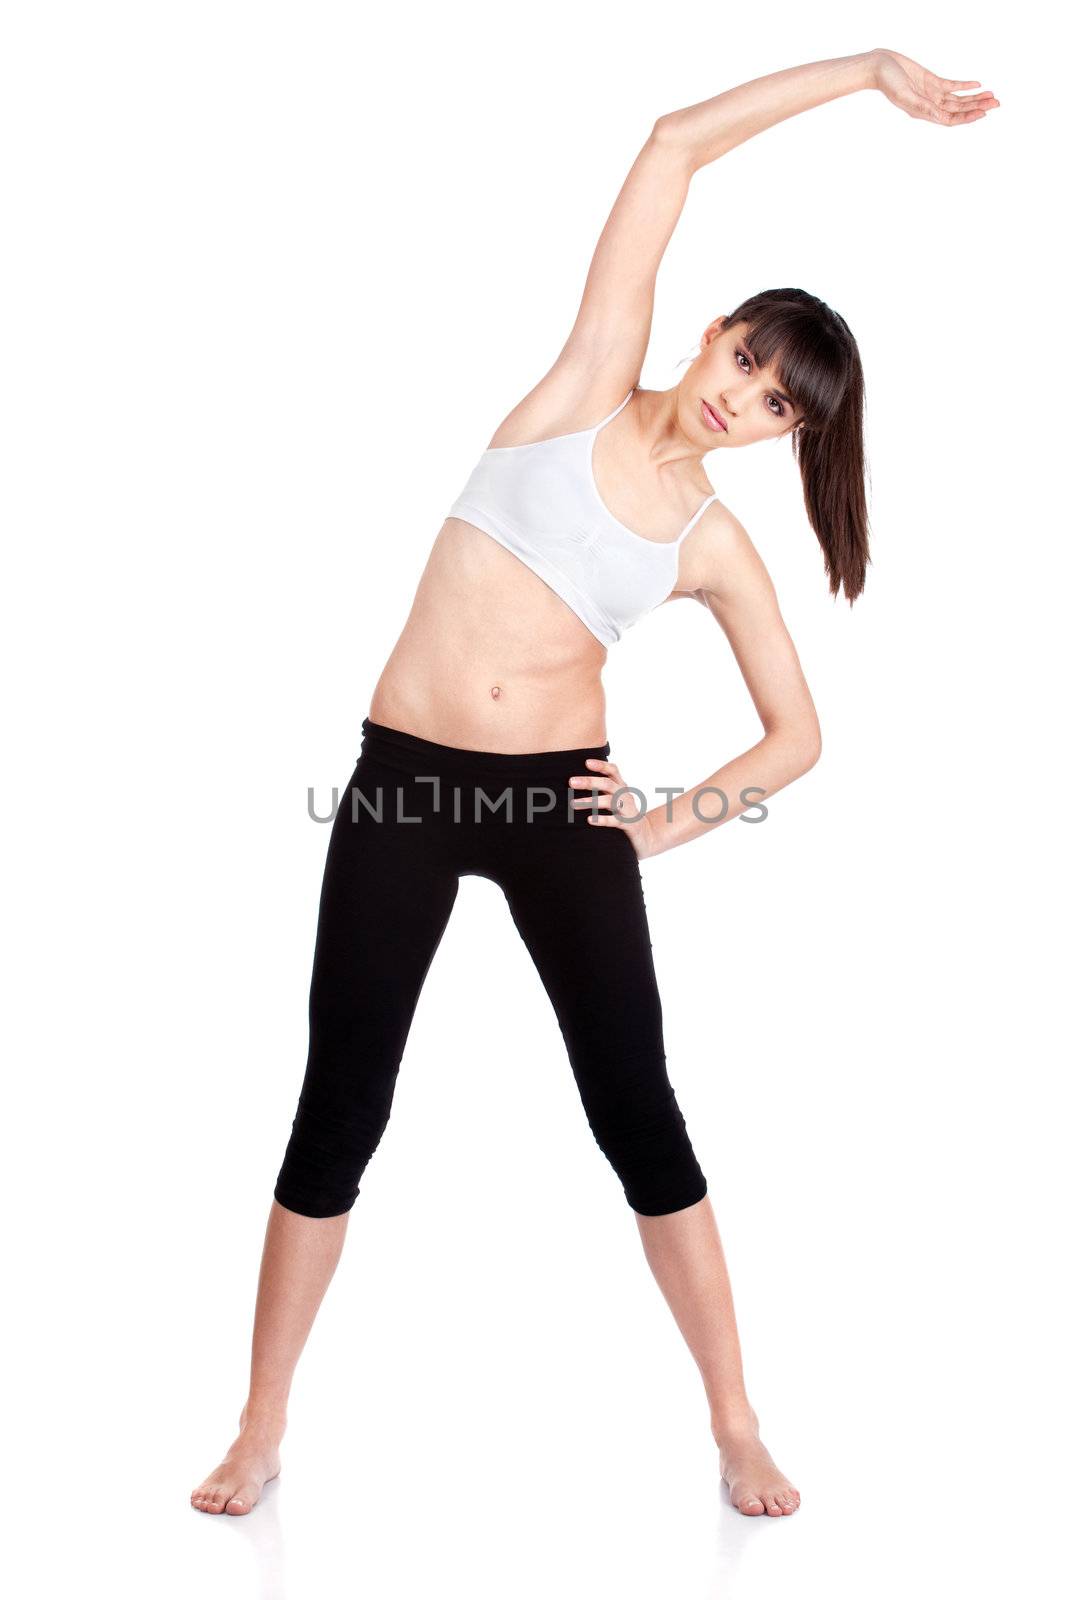 Woman doing extension exercise, isolated on white background